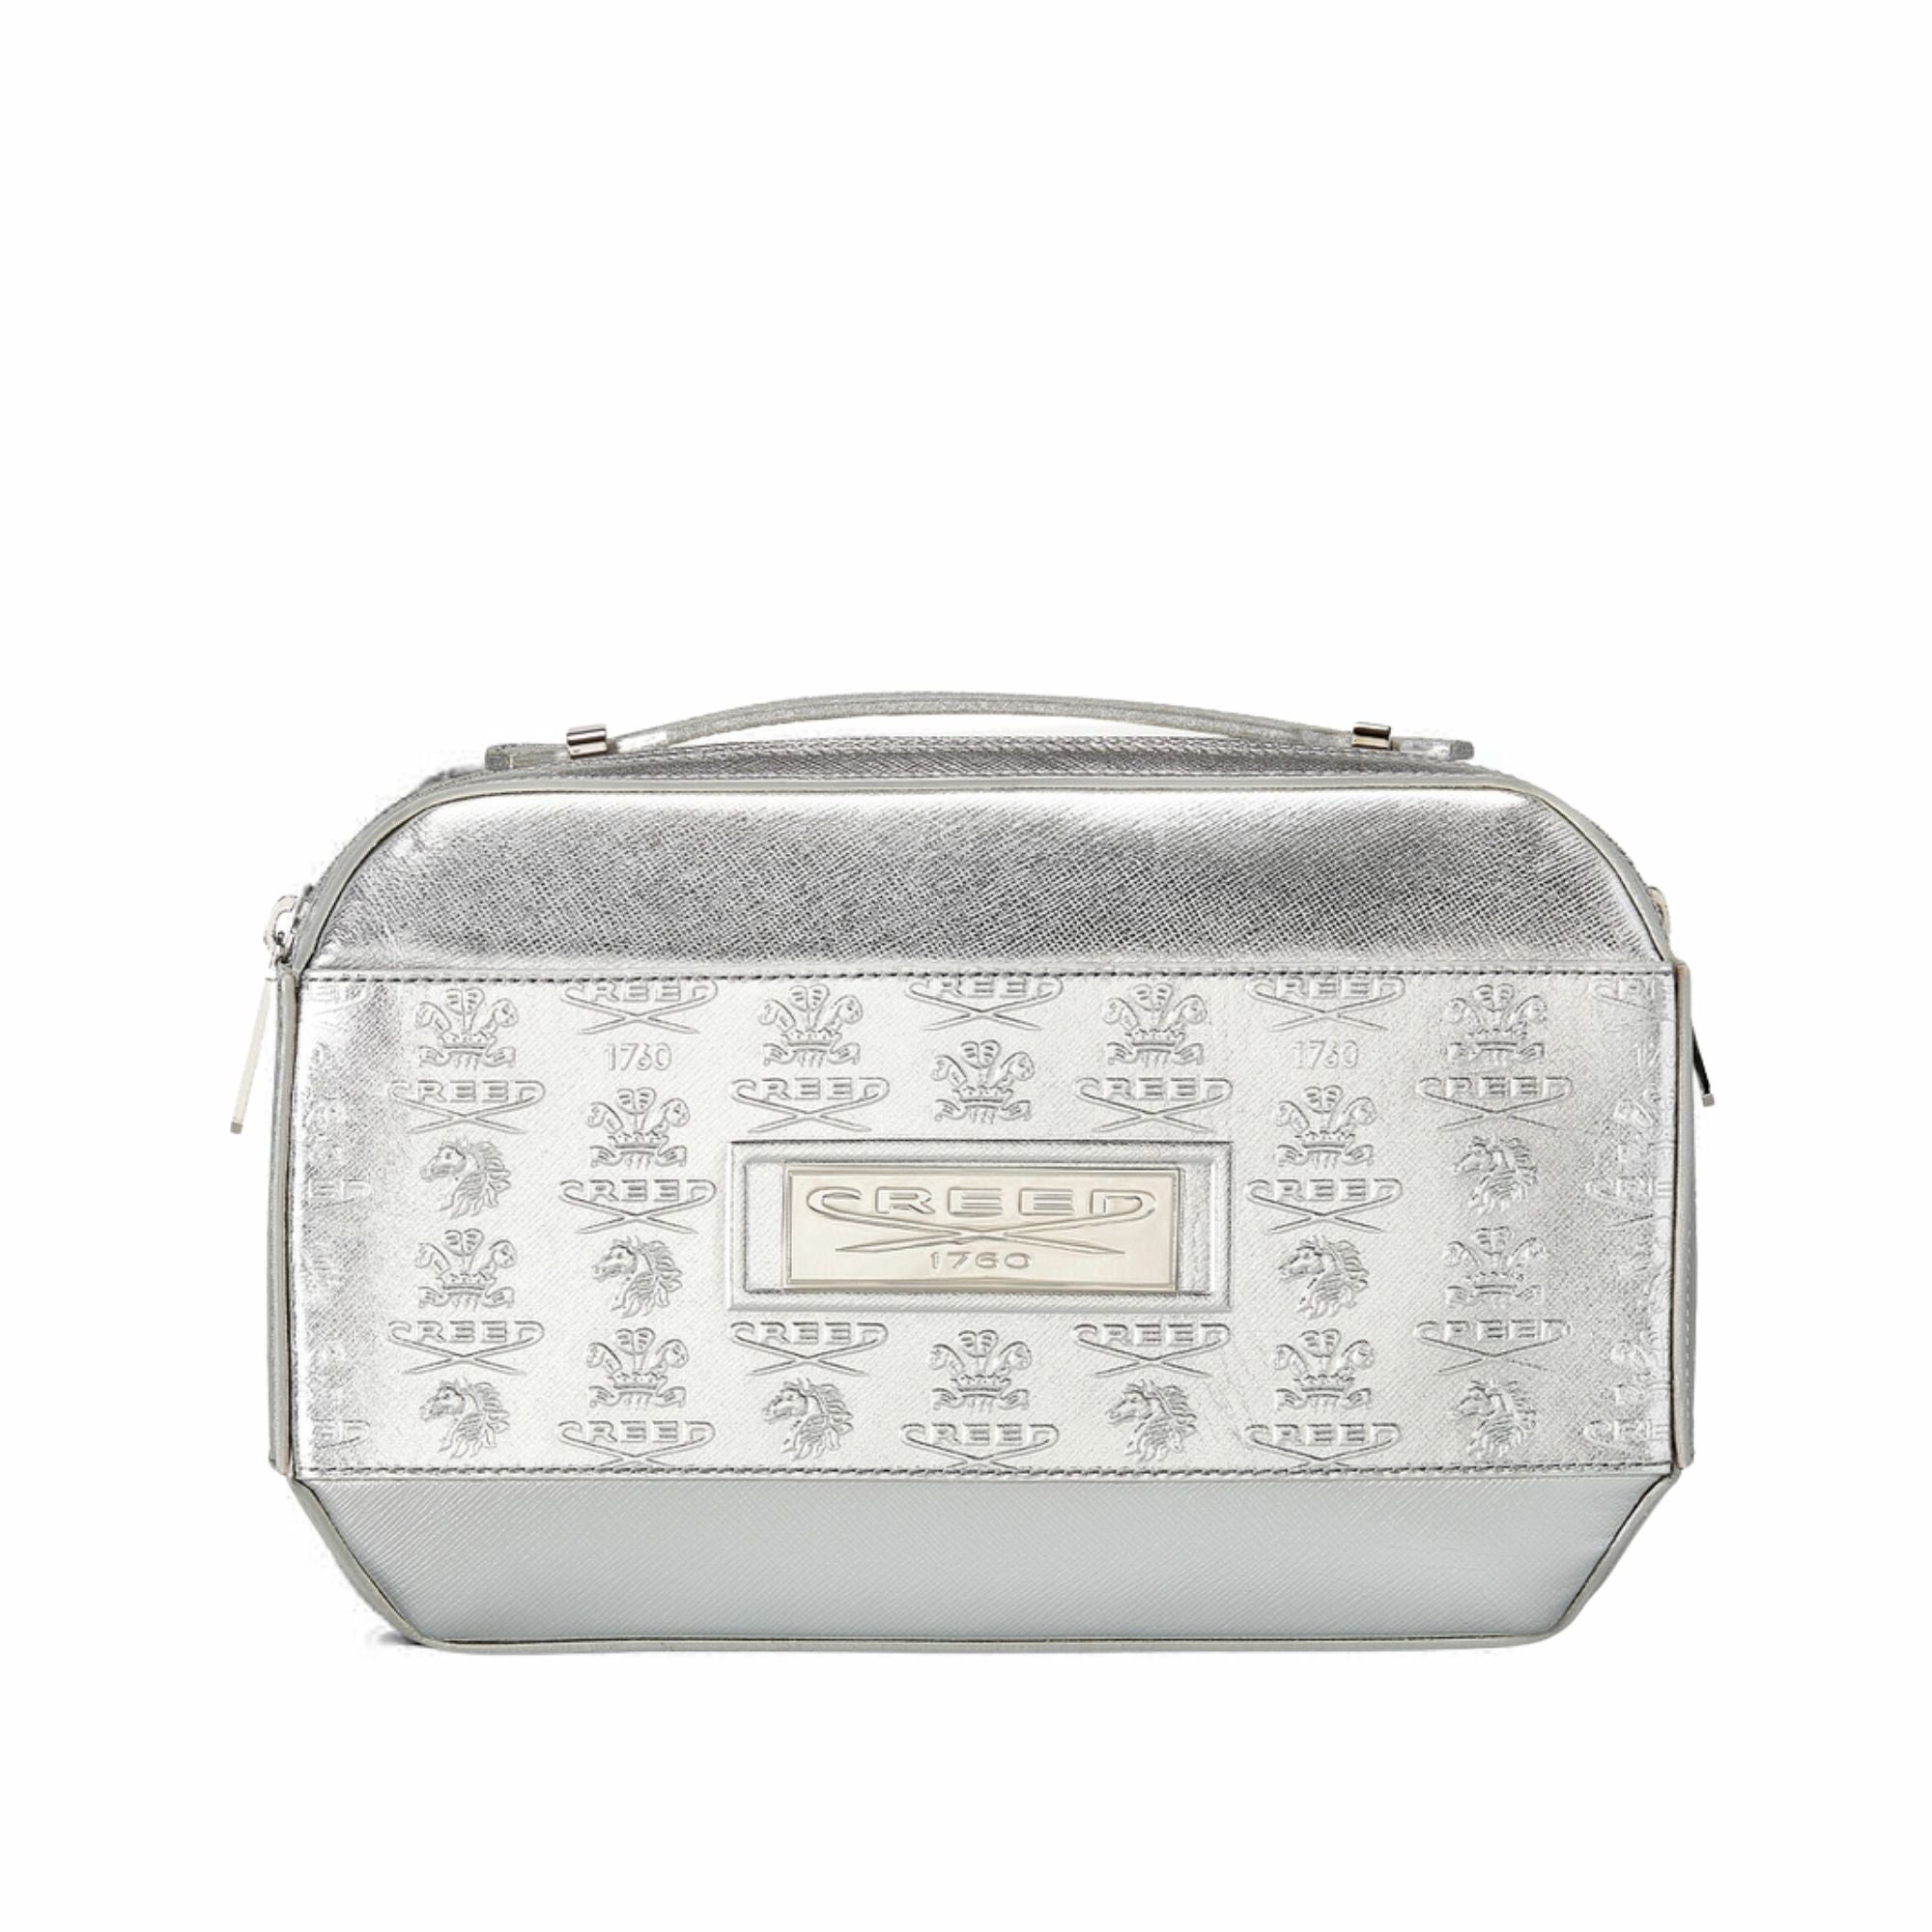 Silver Leather Toiletry Bag